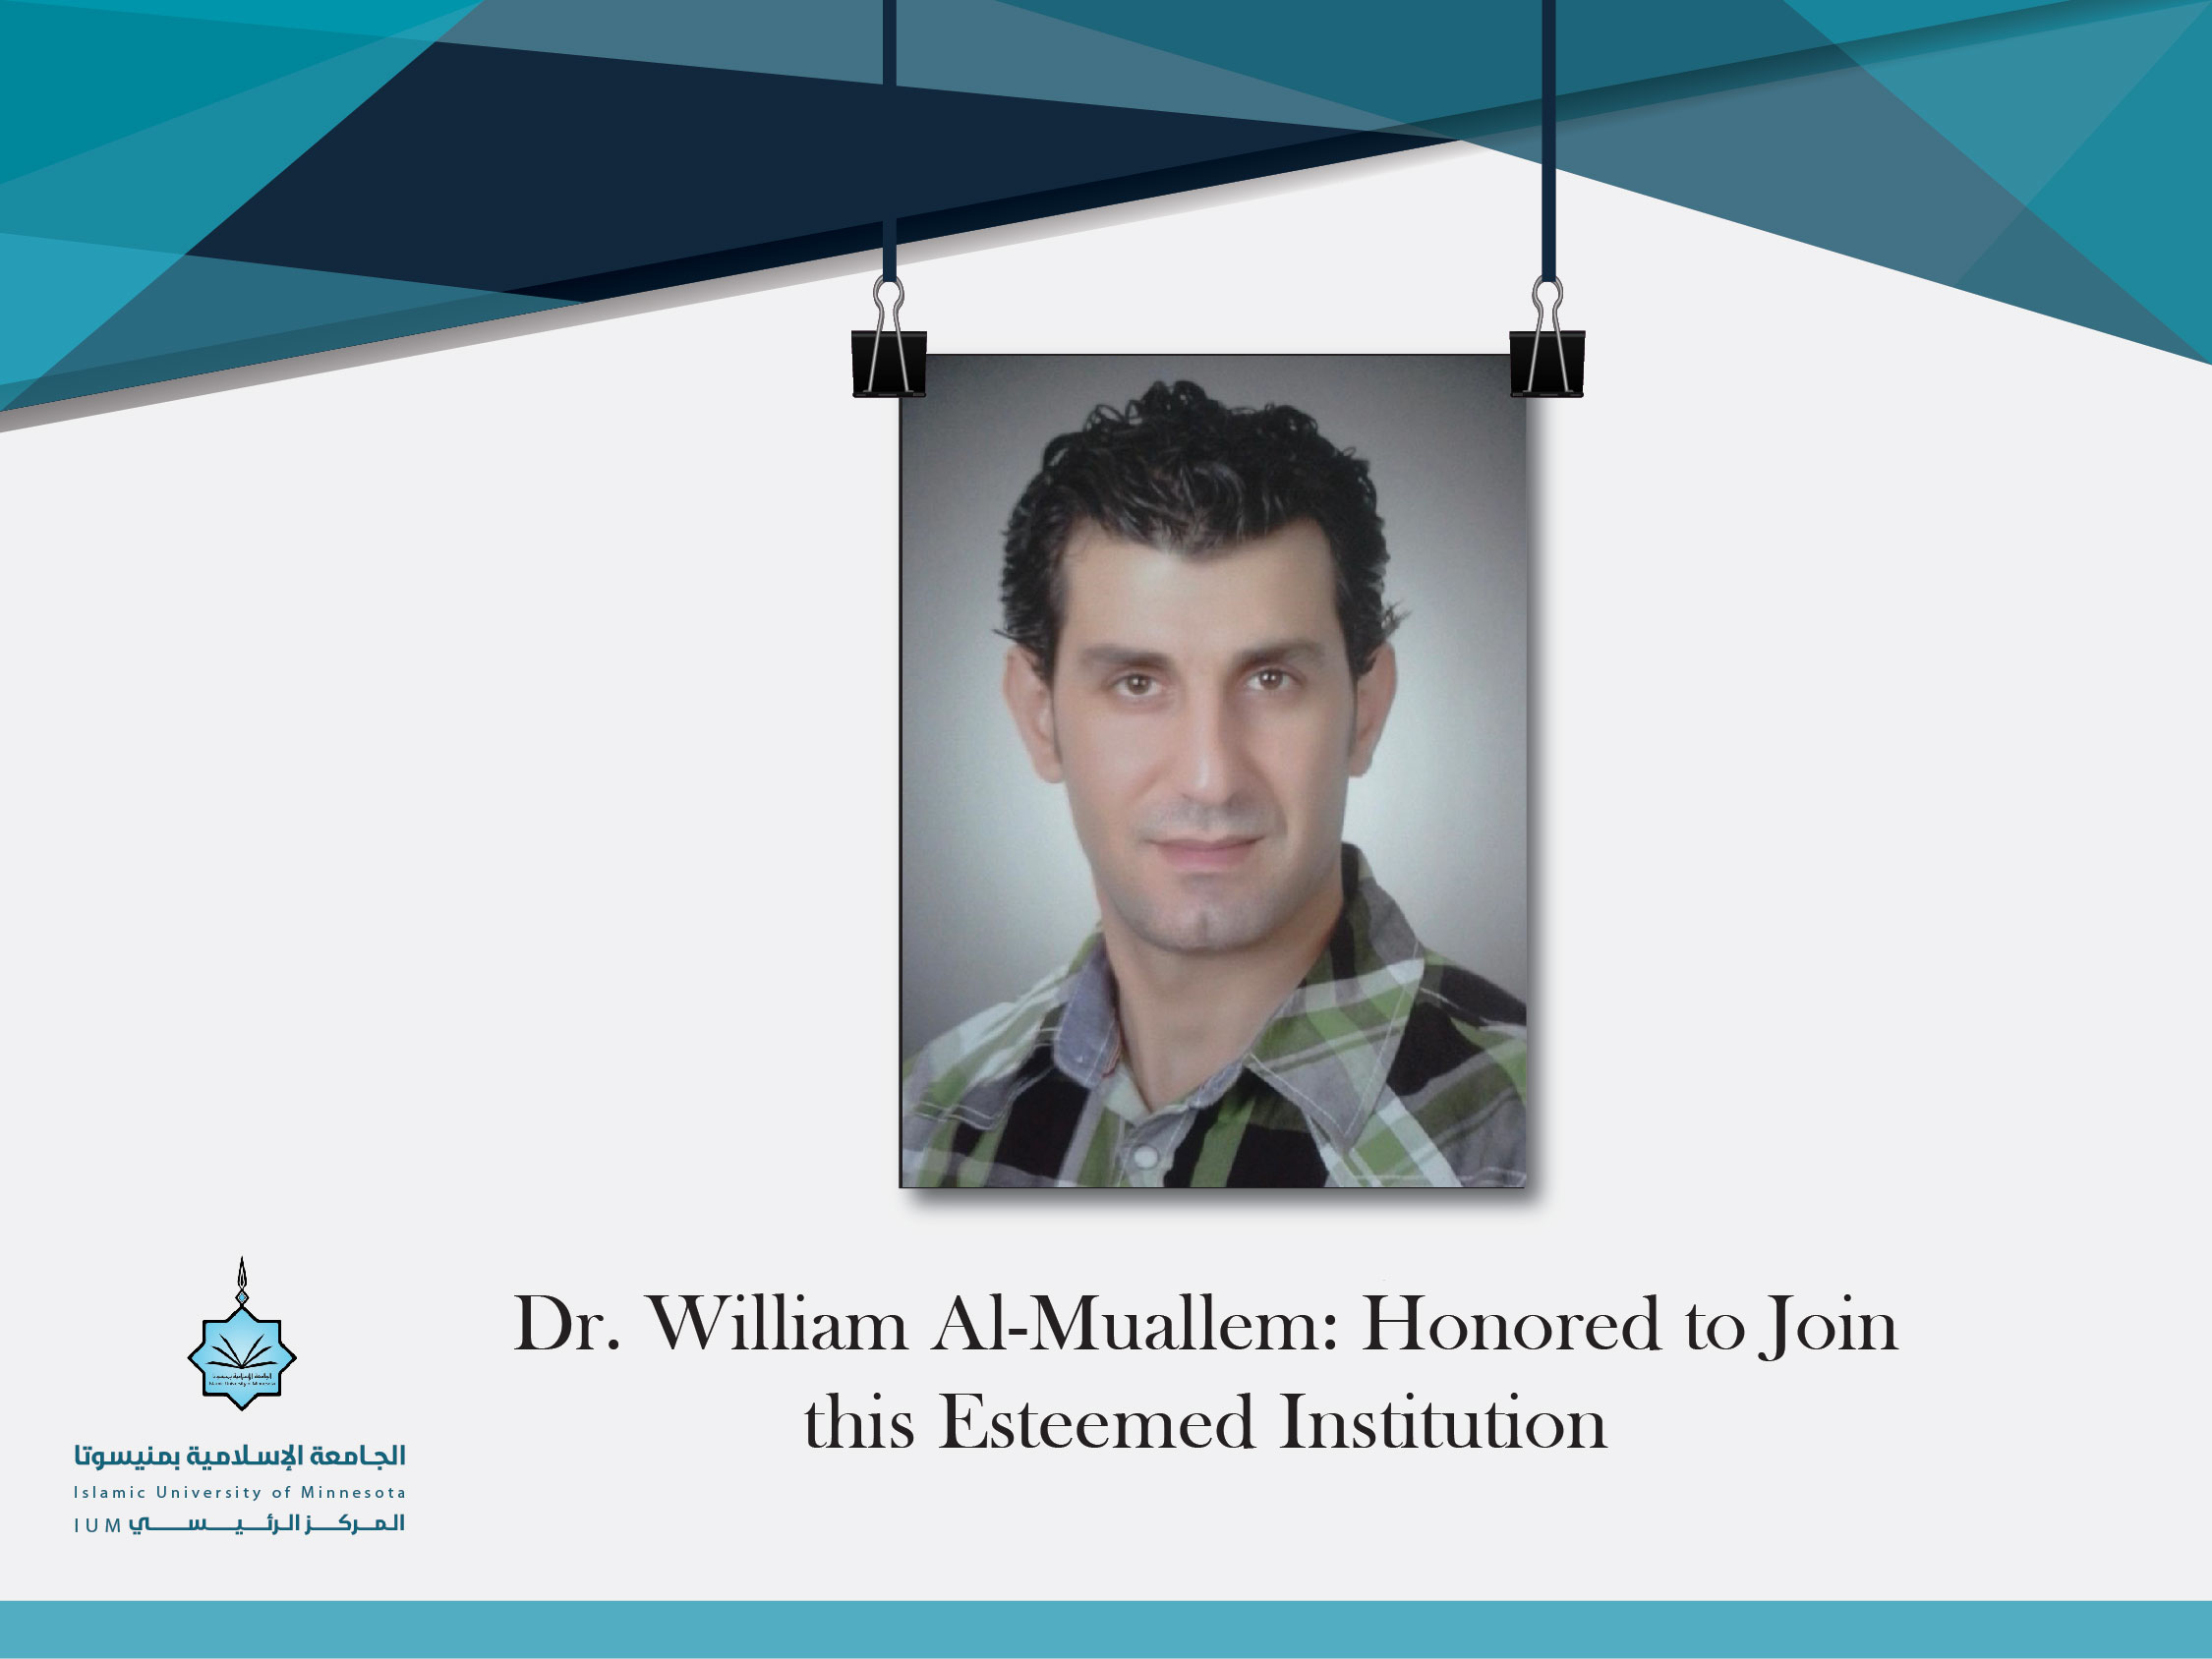 Dr. William Al-Muallem: Honored to Join this Esteemed Institution